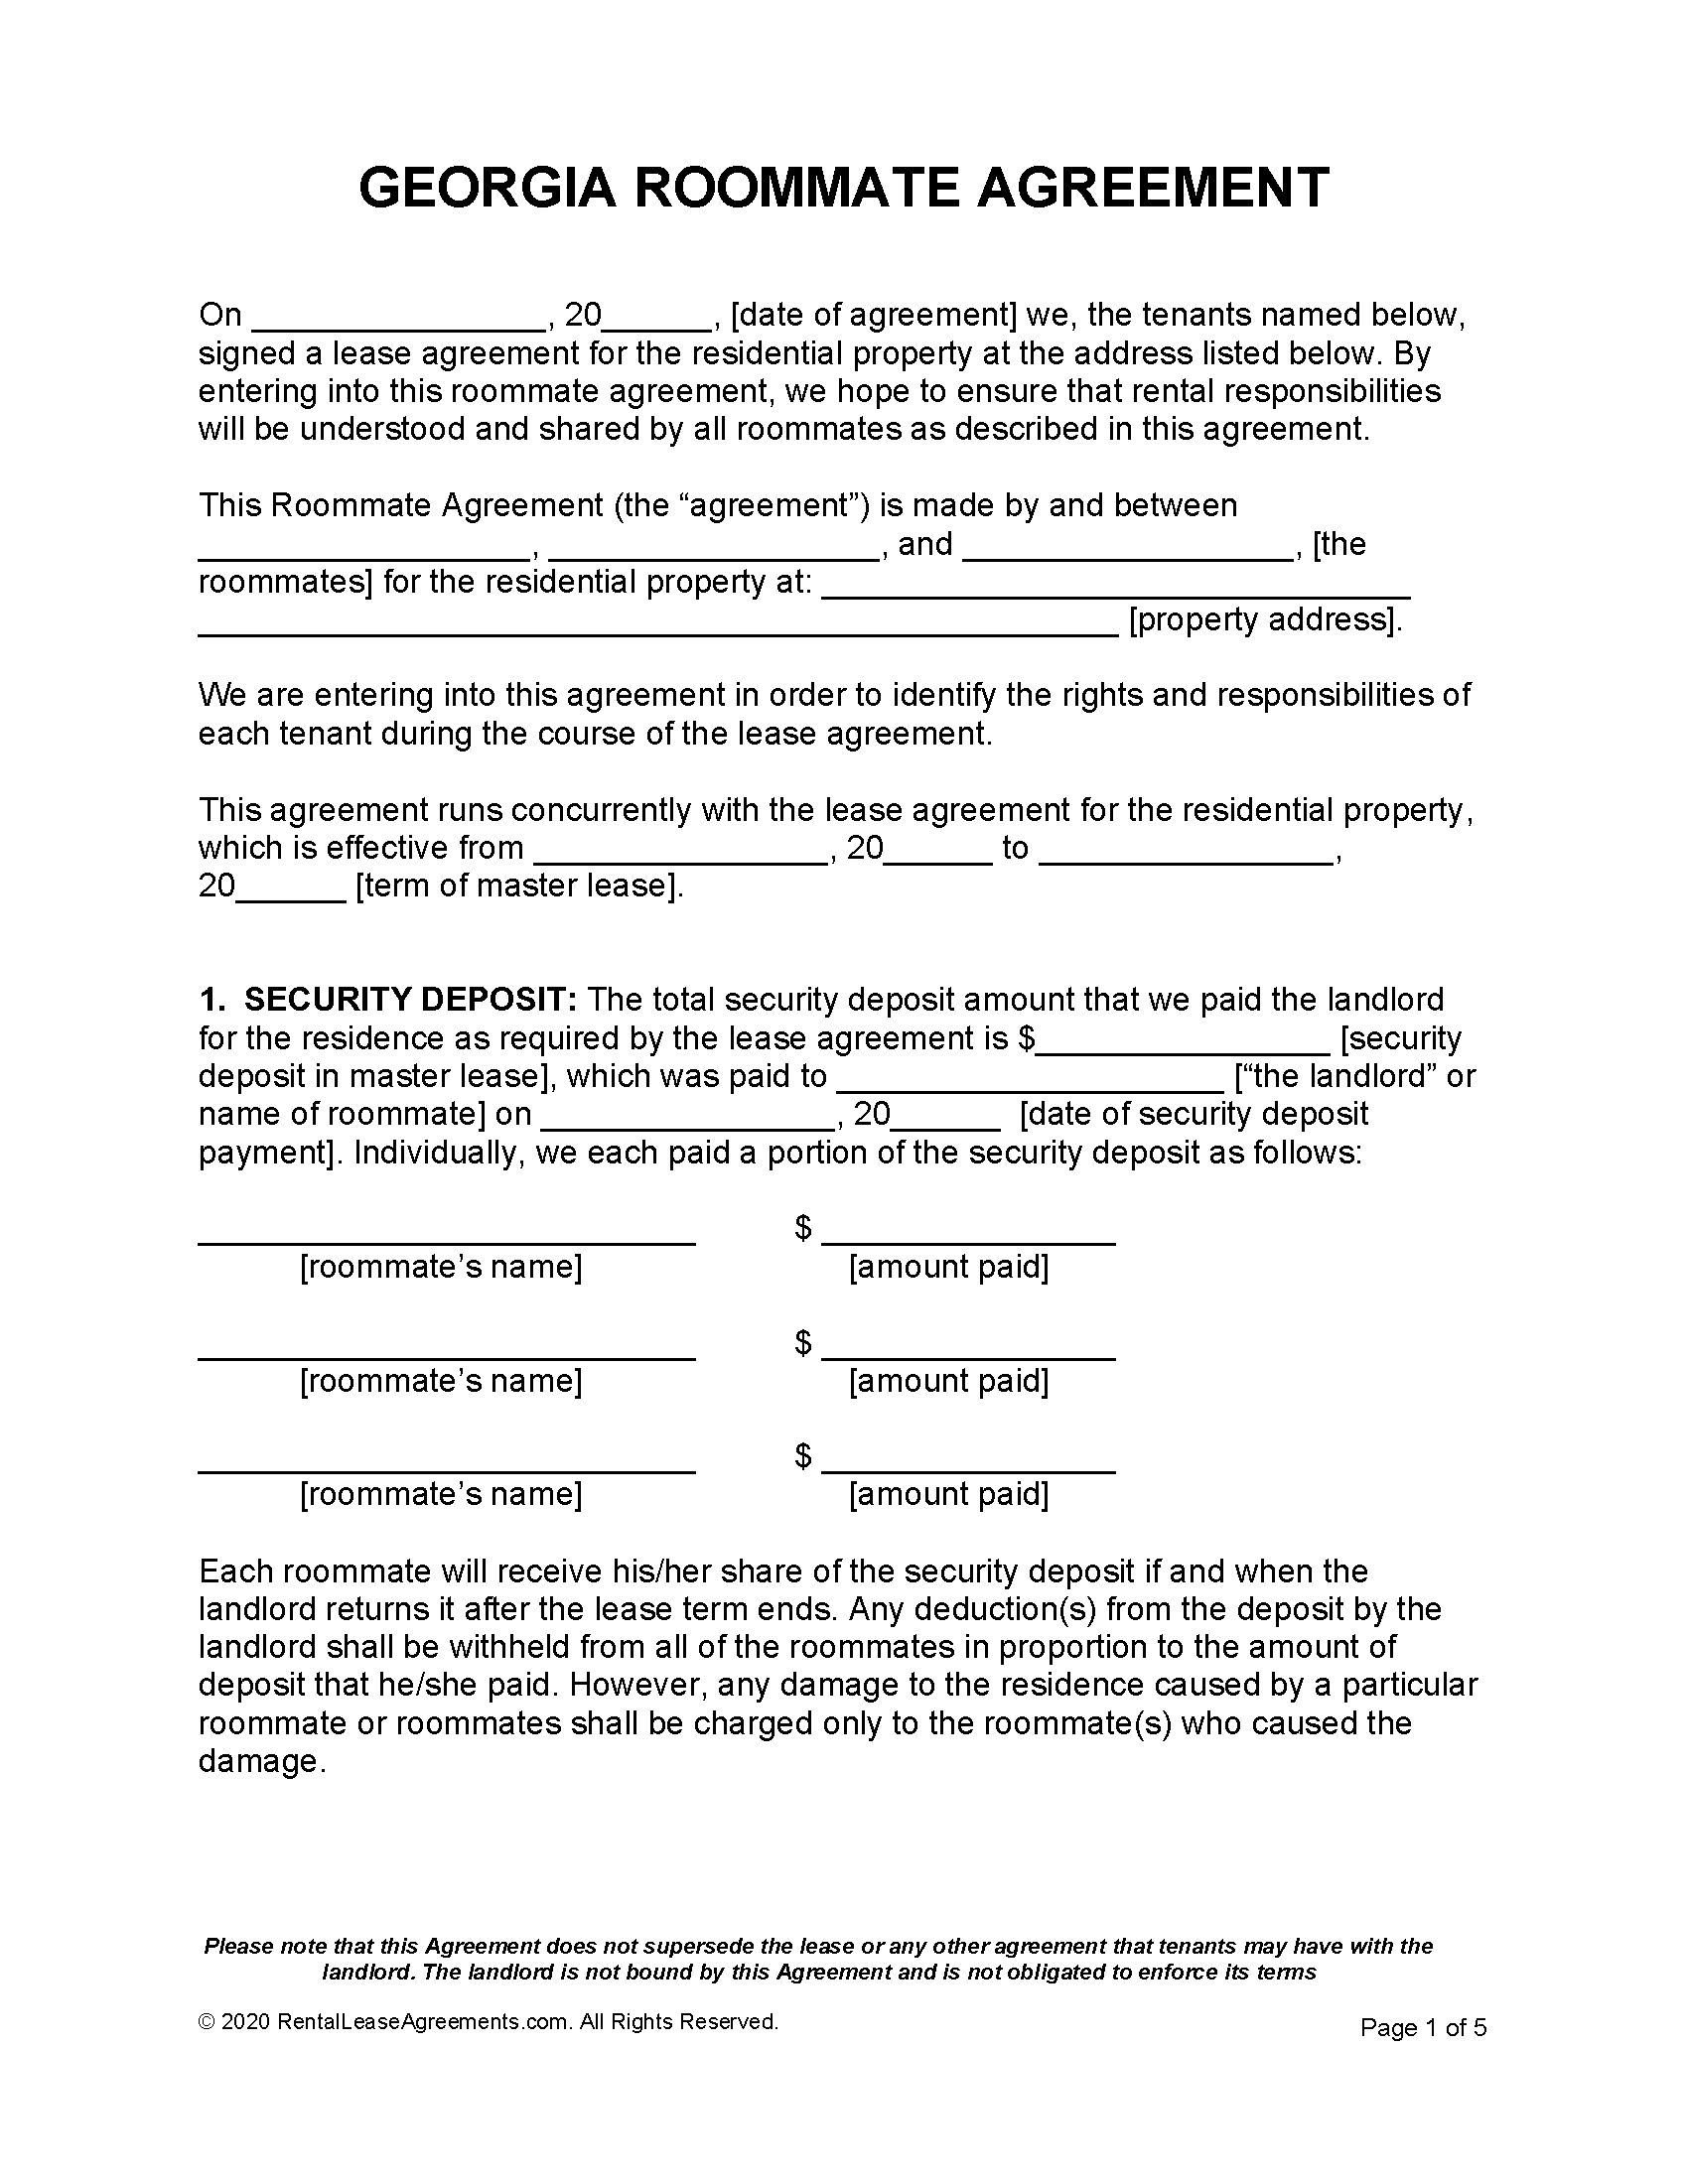 40-free-roommate-agreement-templates-forms-word-pdf